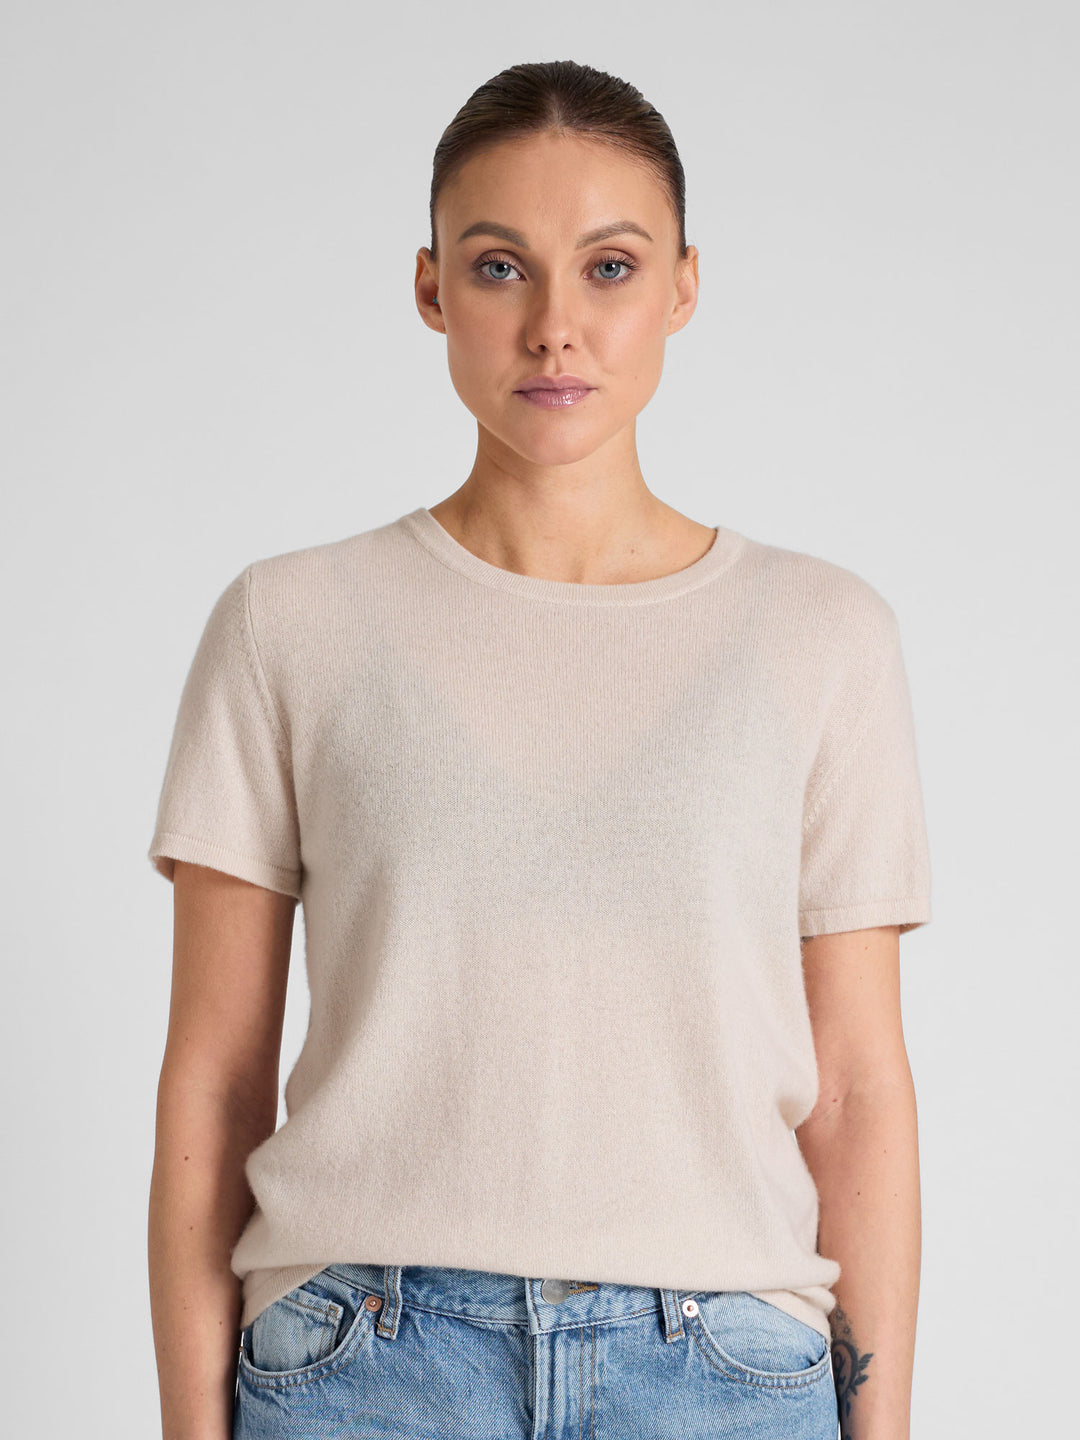 Cashmere t-shirt "Fresh" in 100% pure cashmere. Scandinavian design by Kashmina. Color: Pearl.